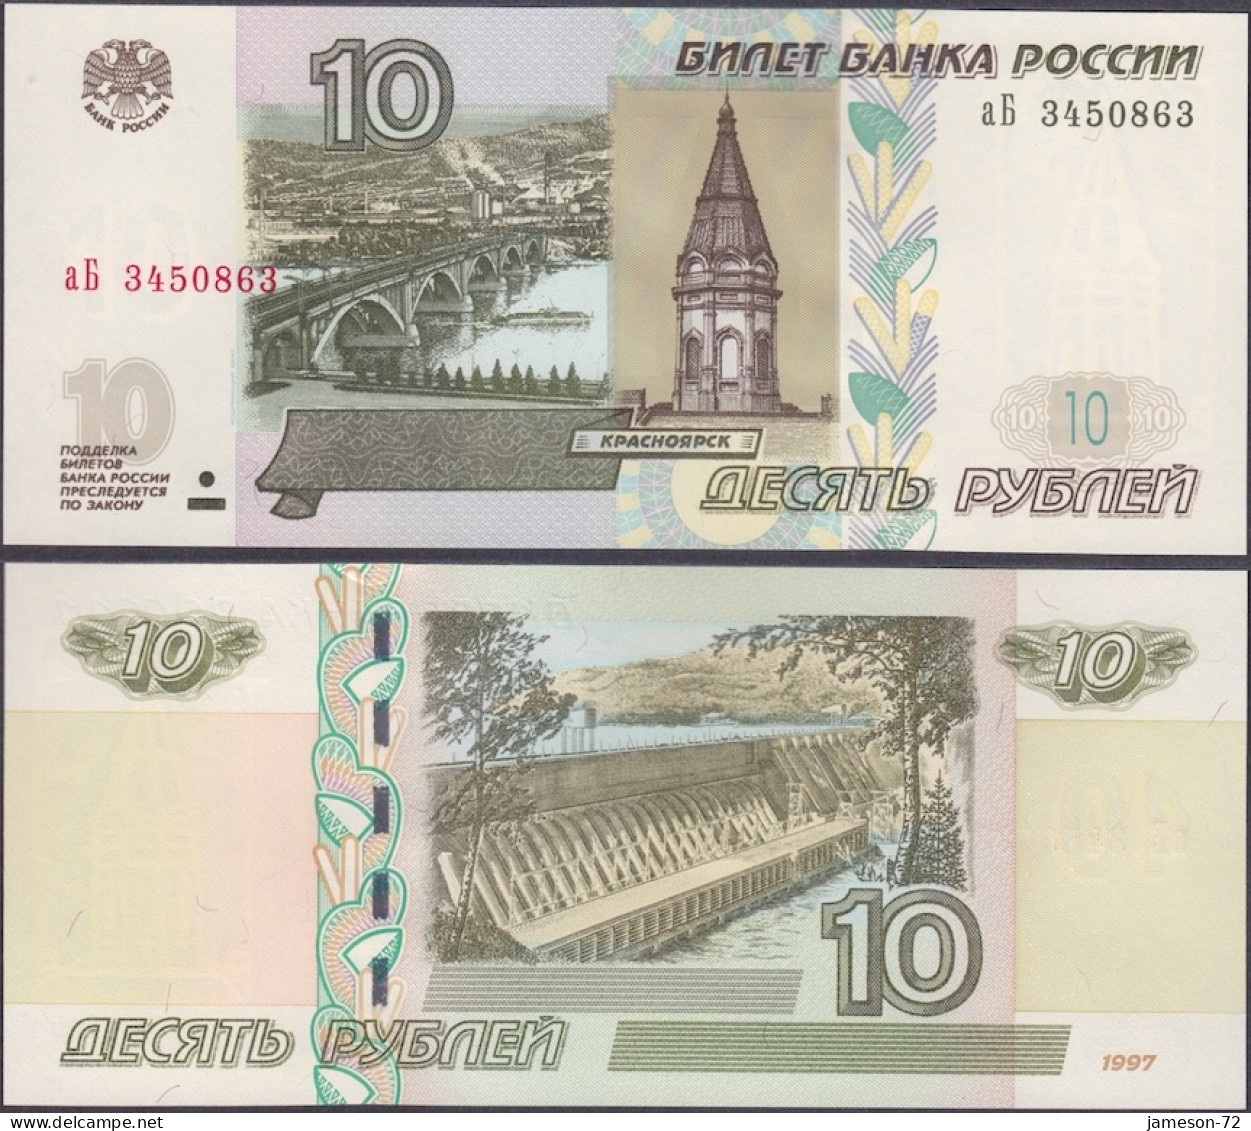 RUSSIA - 10 Rubles 1997 P# 268a Europe Banknote - Edelweiss Coins - Russia